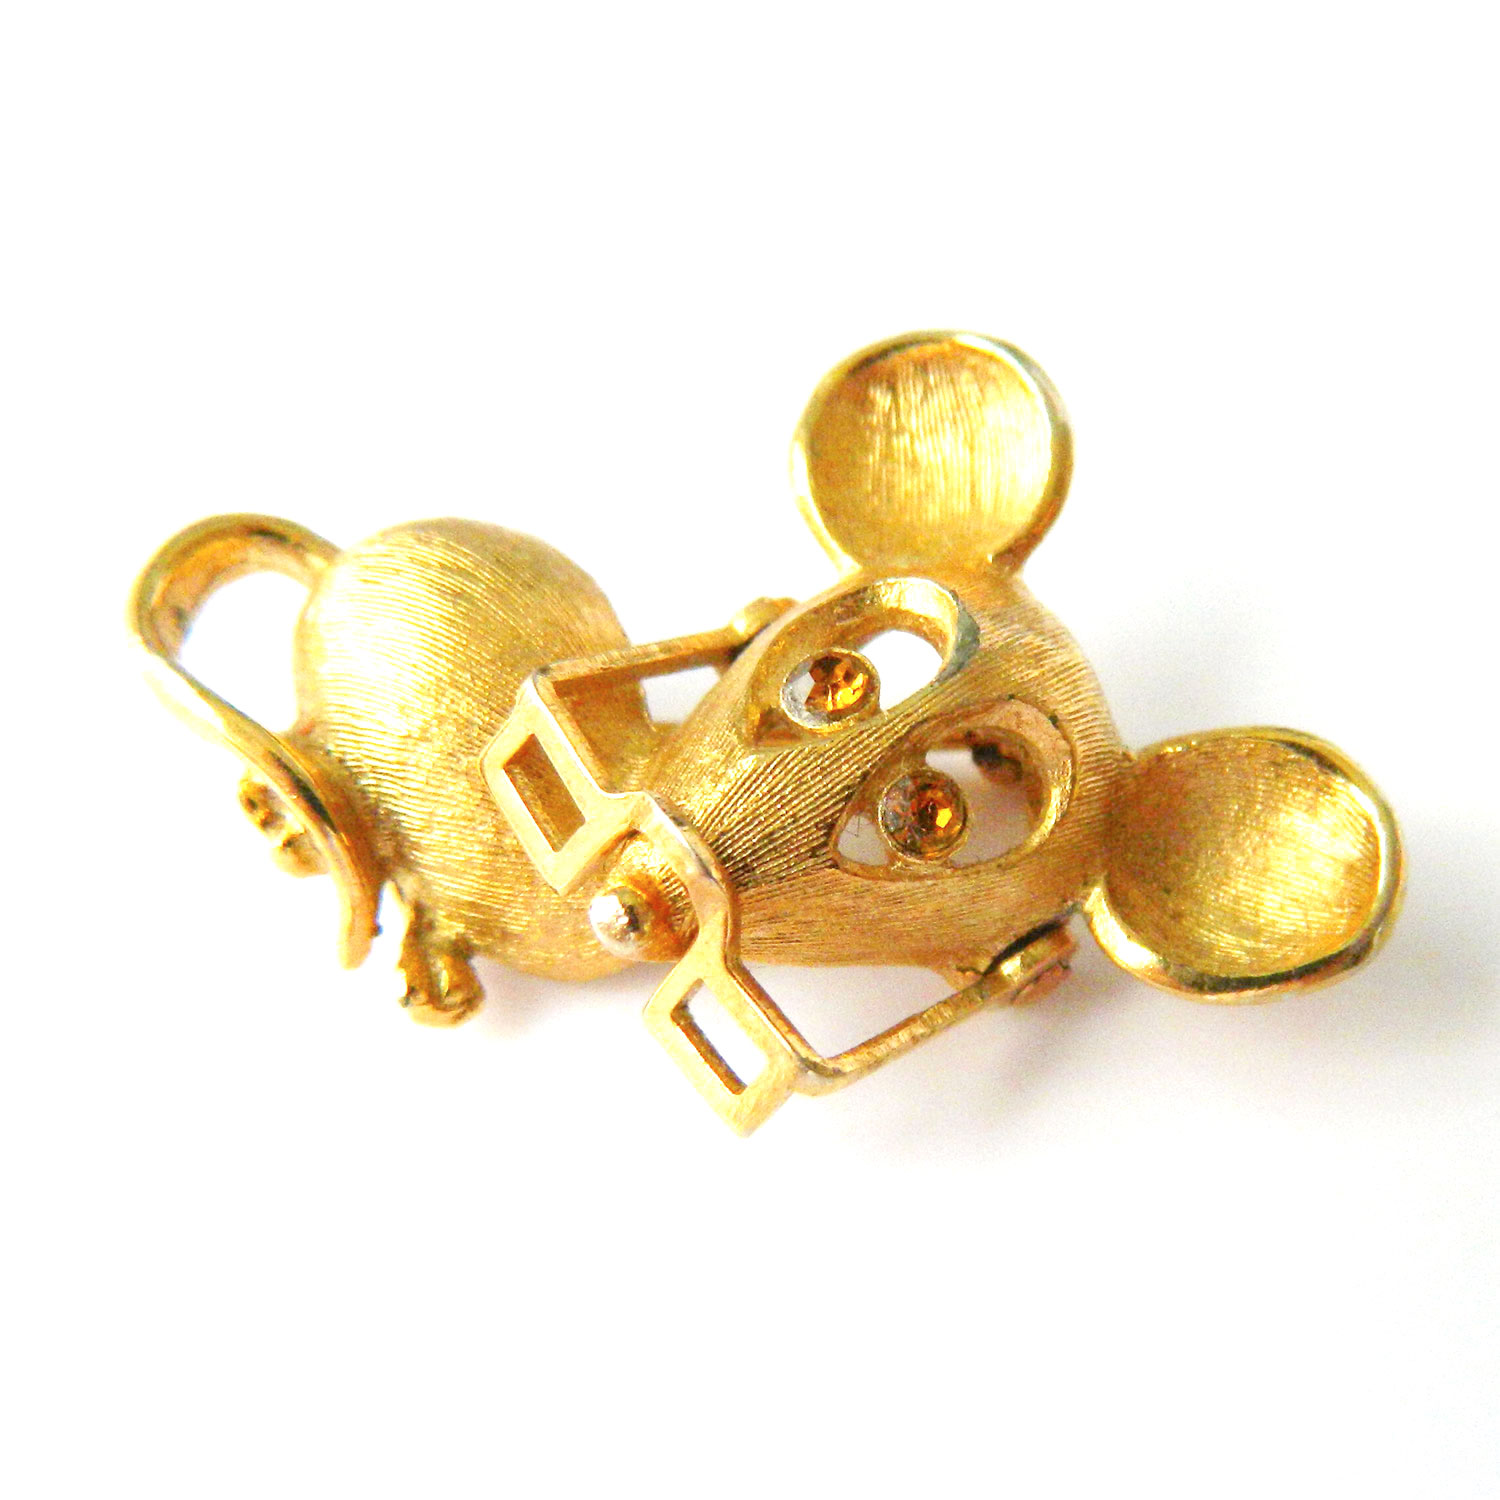 Mouse scatter pin